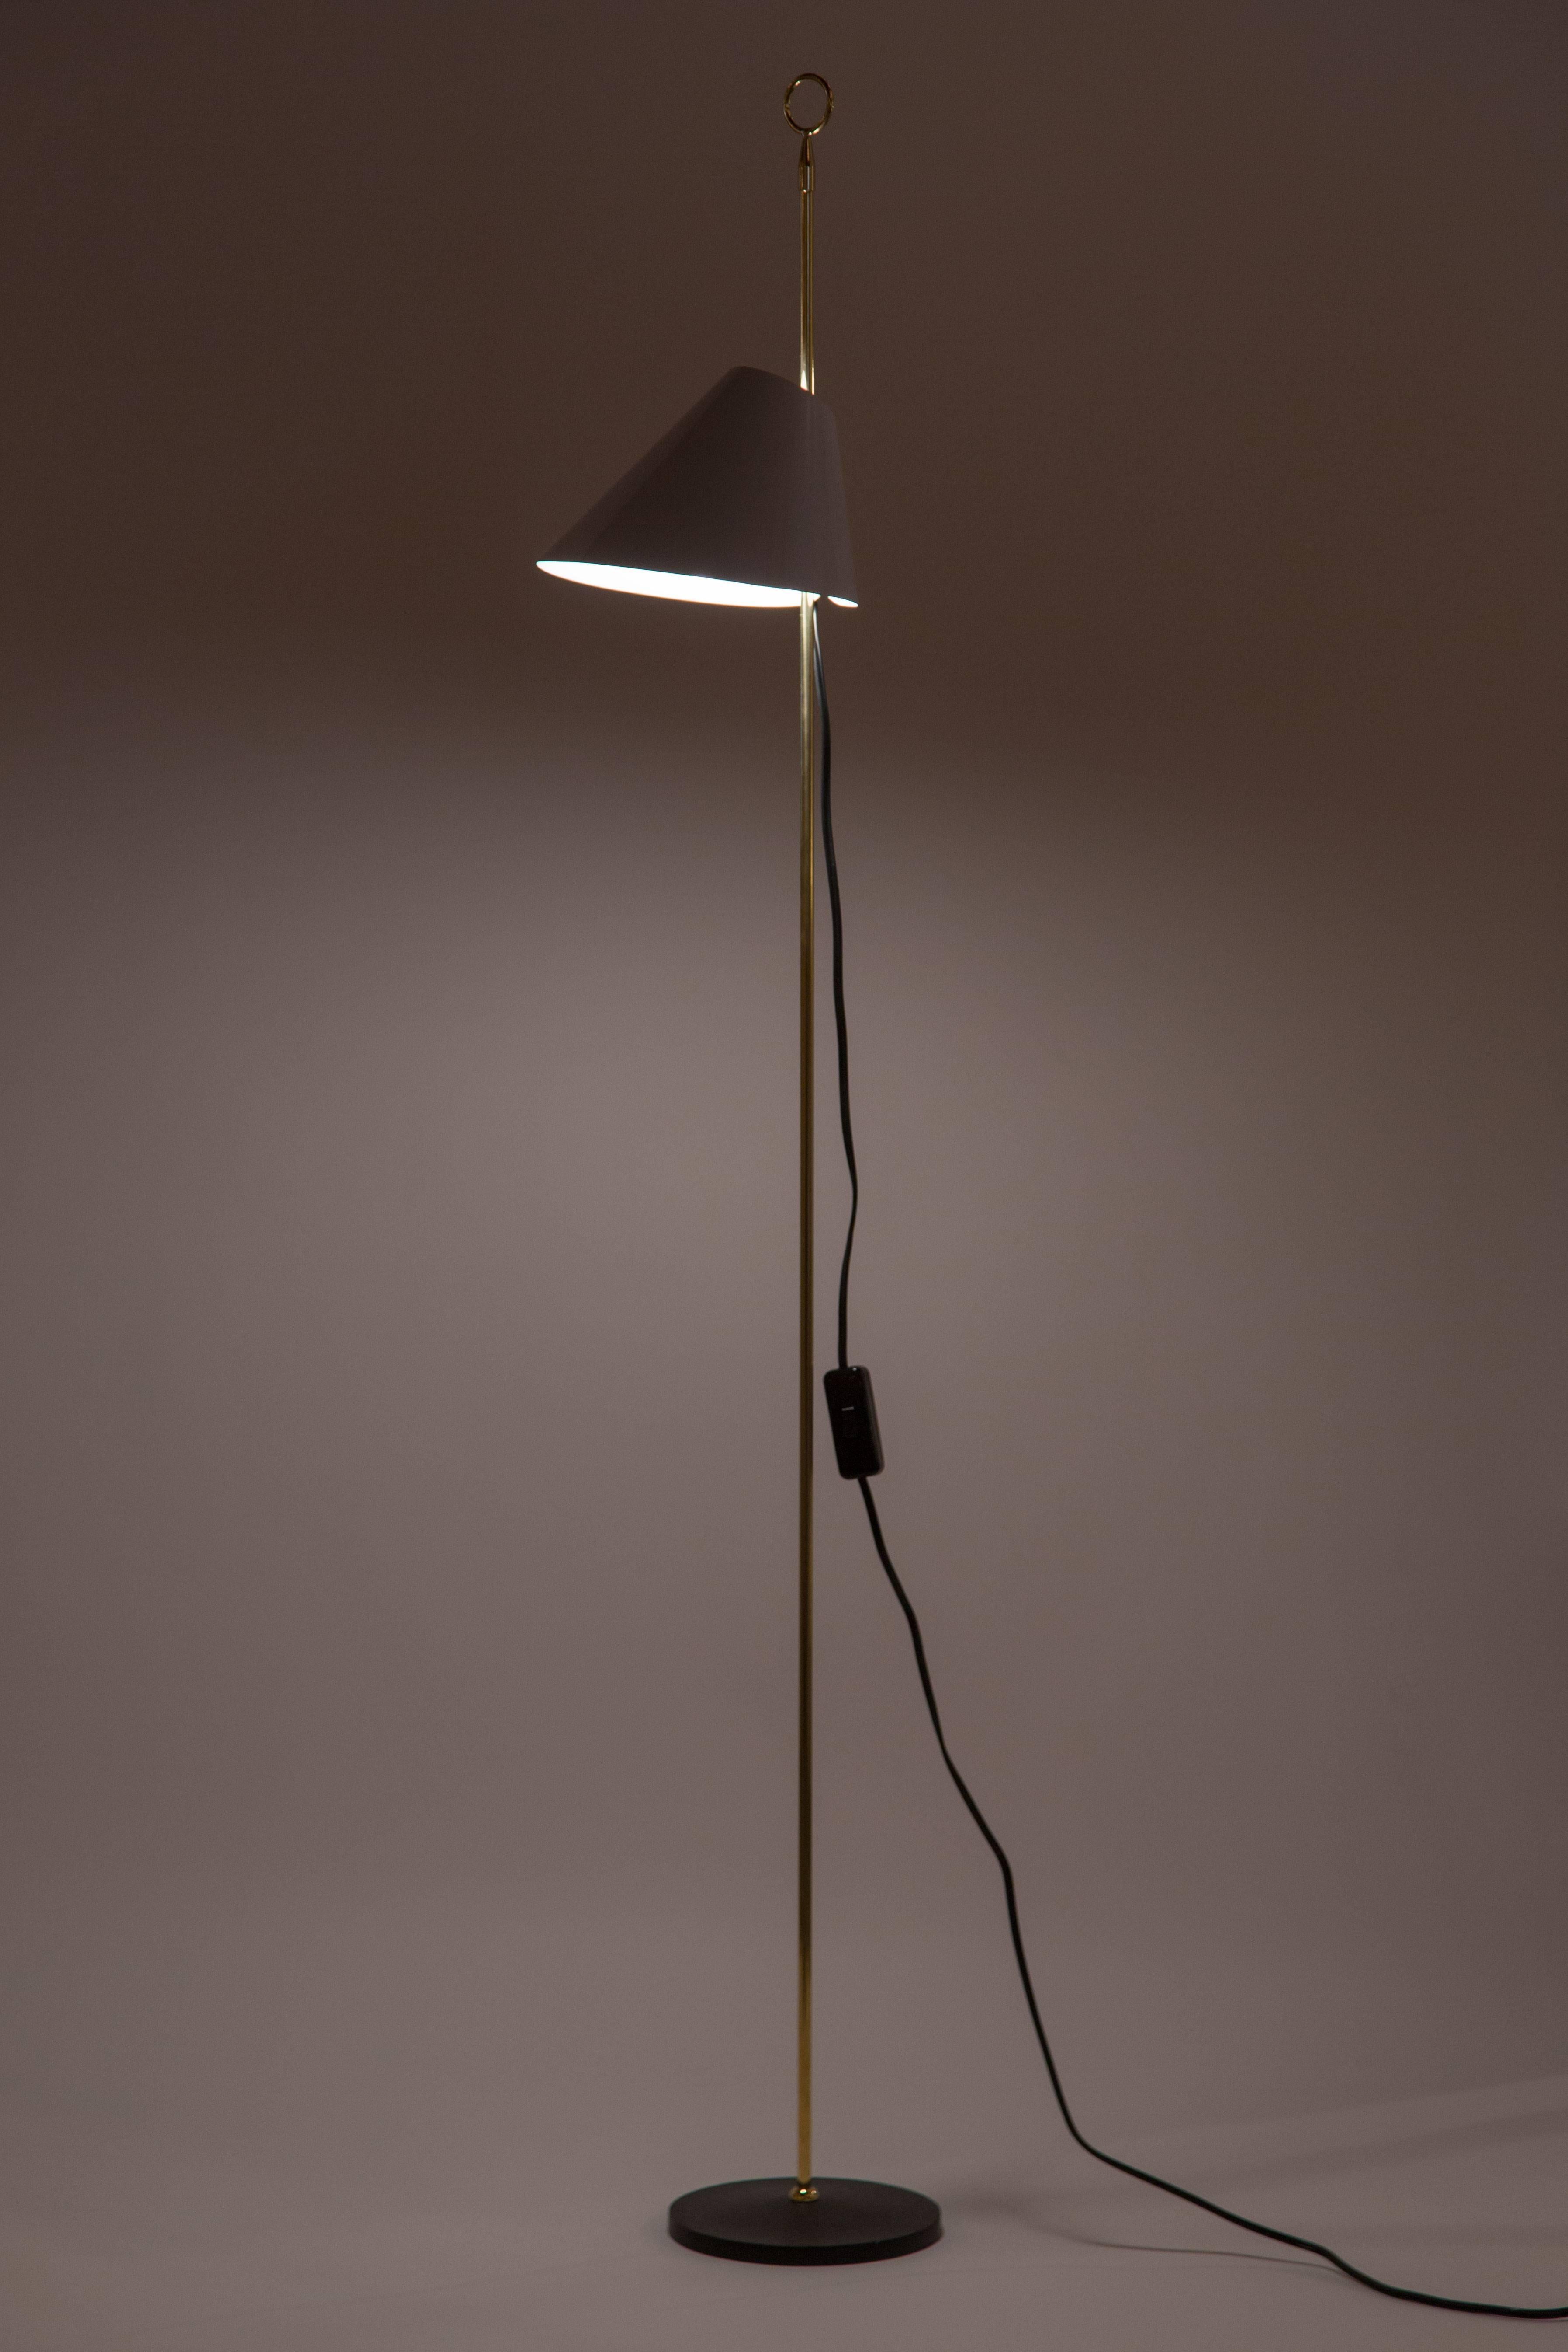 Floor lamp, with black painted cast iron base, stem in natural brass, height of shade is adjusted by sliding reflector in Azucena white. E27 halogen 60w maximum bulb.